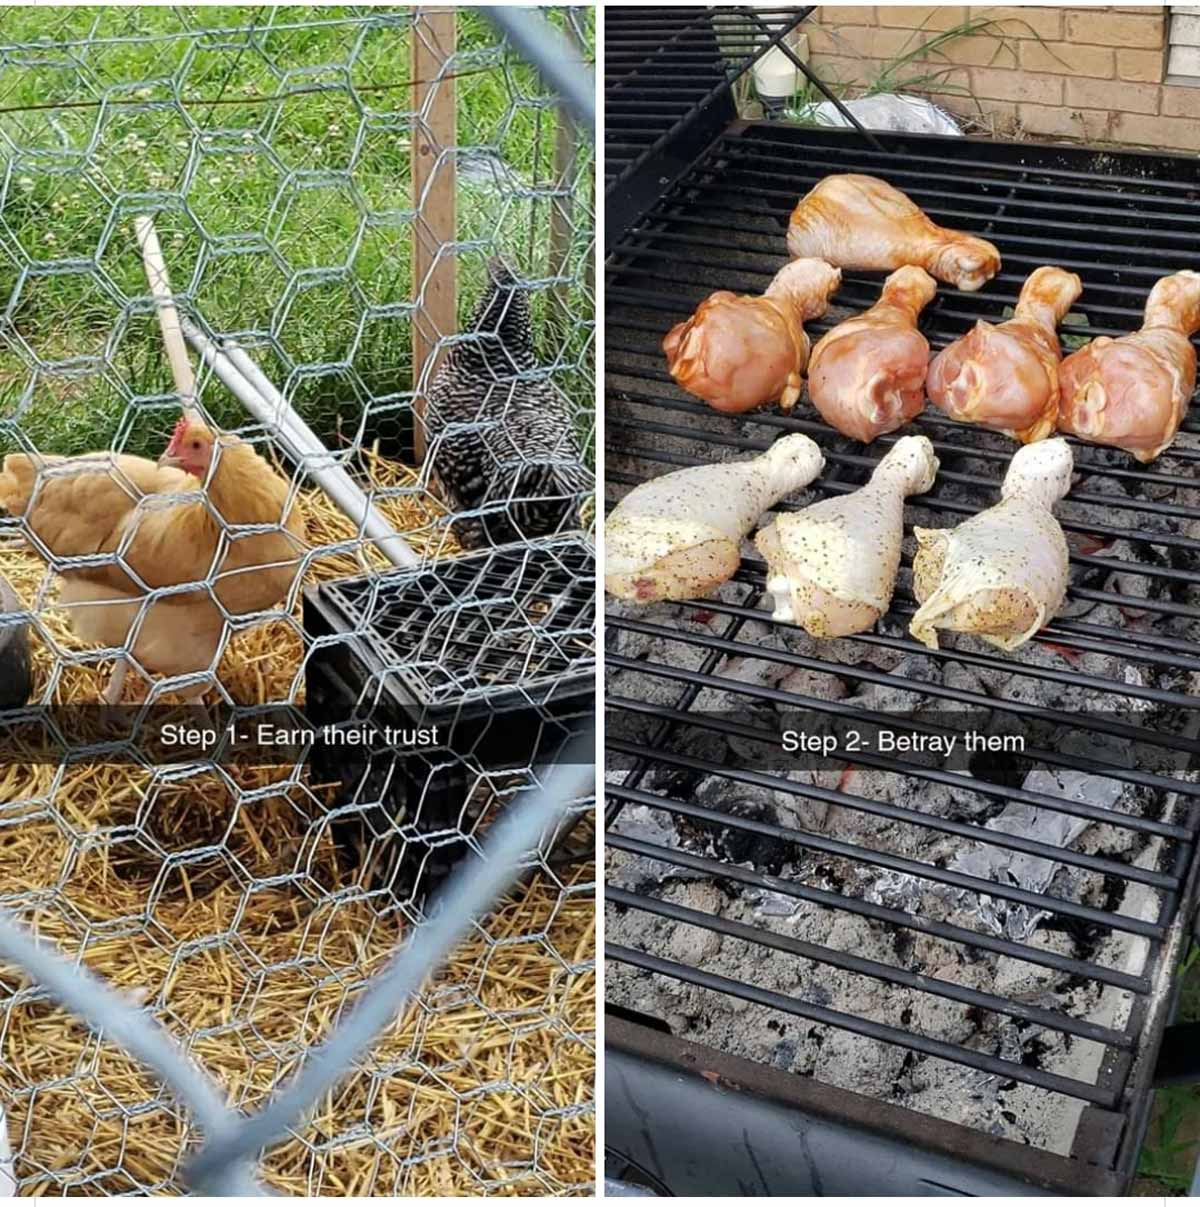 Funny farmer pic about gaining chickens trust and then betraying the trust to grill chicken